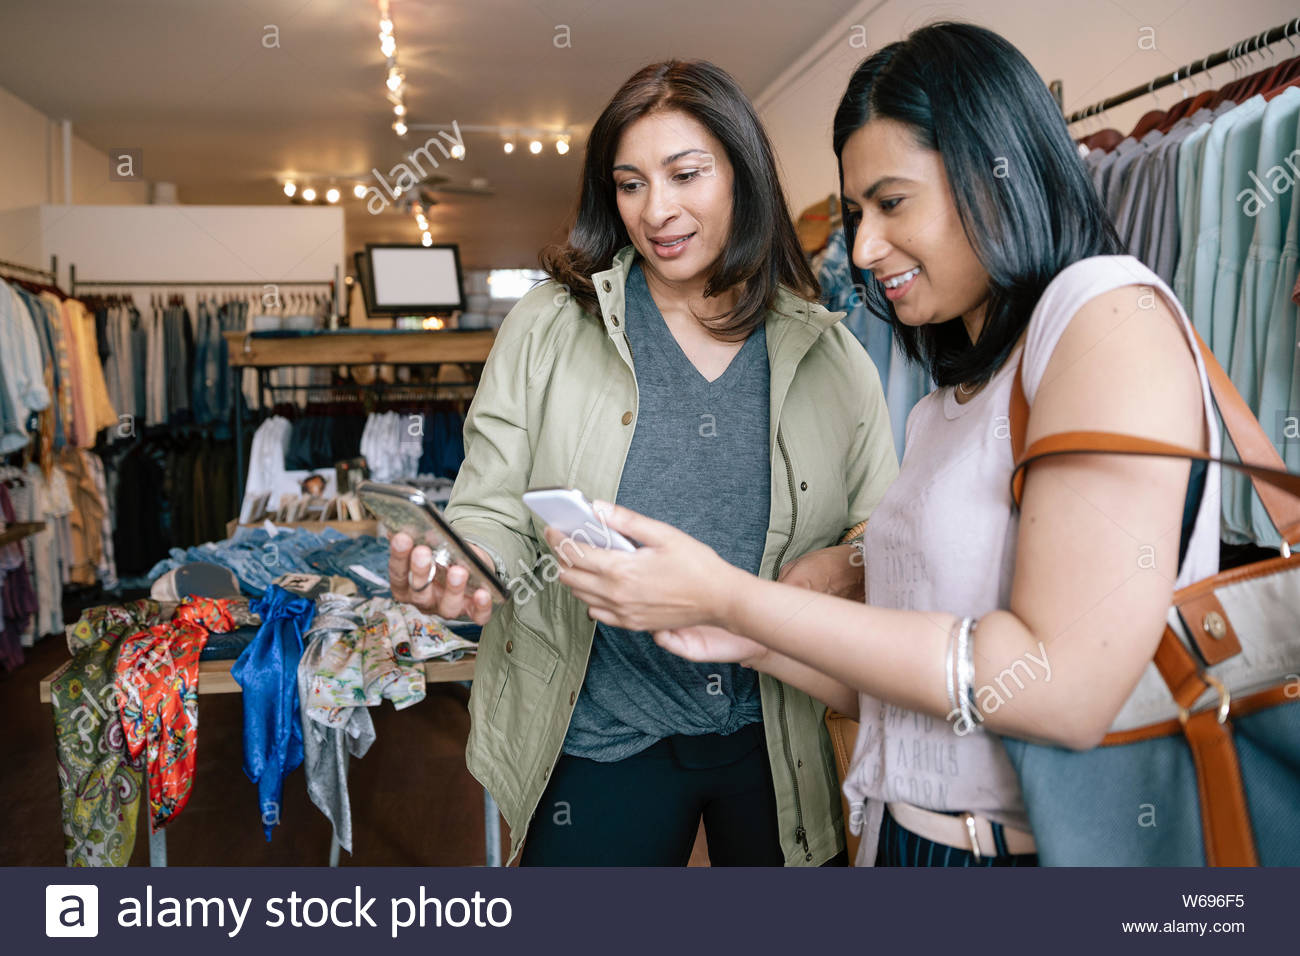 Women with smart phones shopping in clothing store Stock Photo